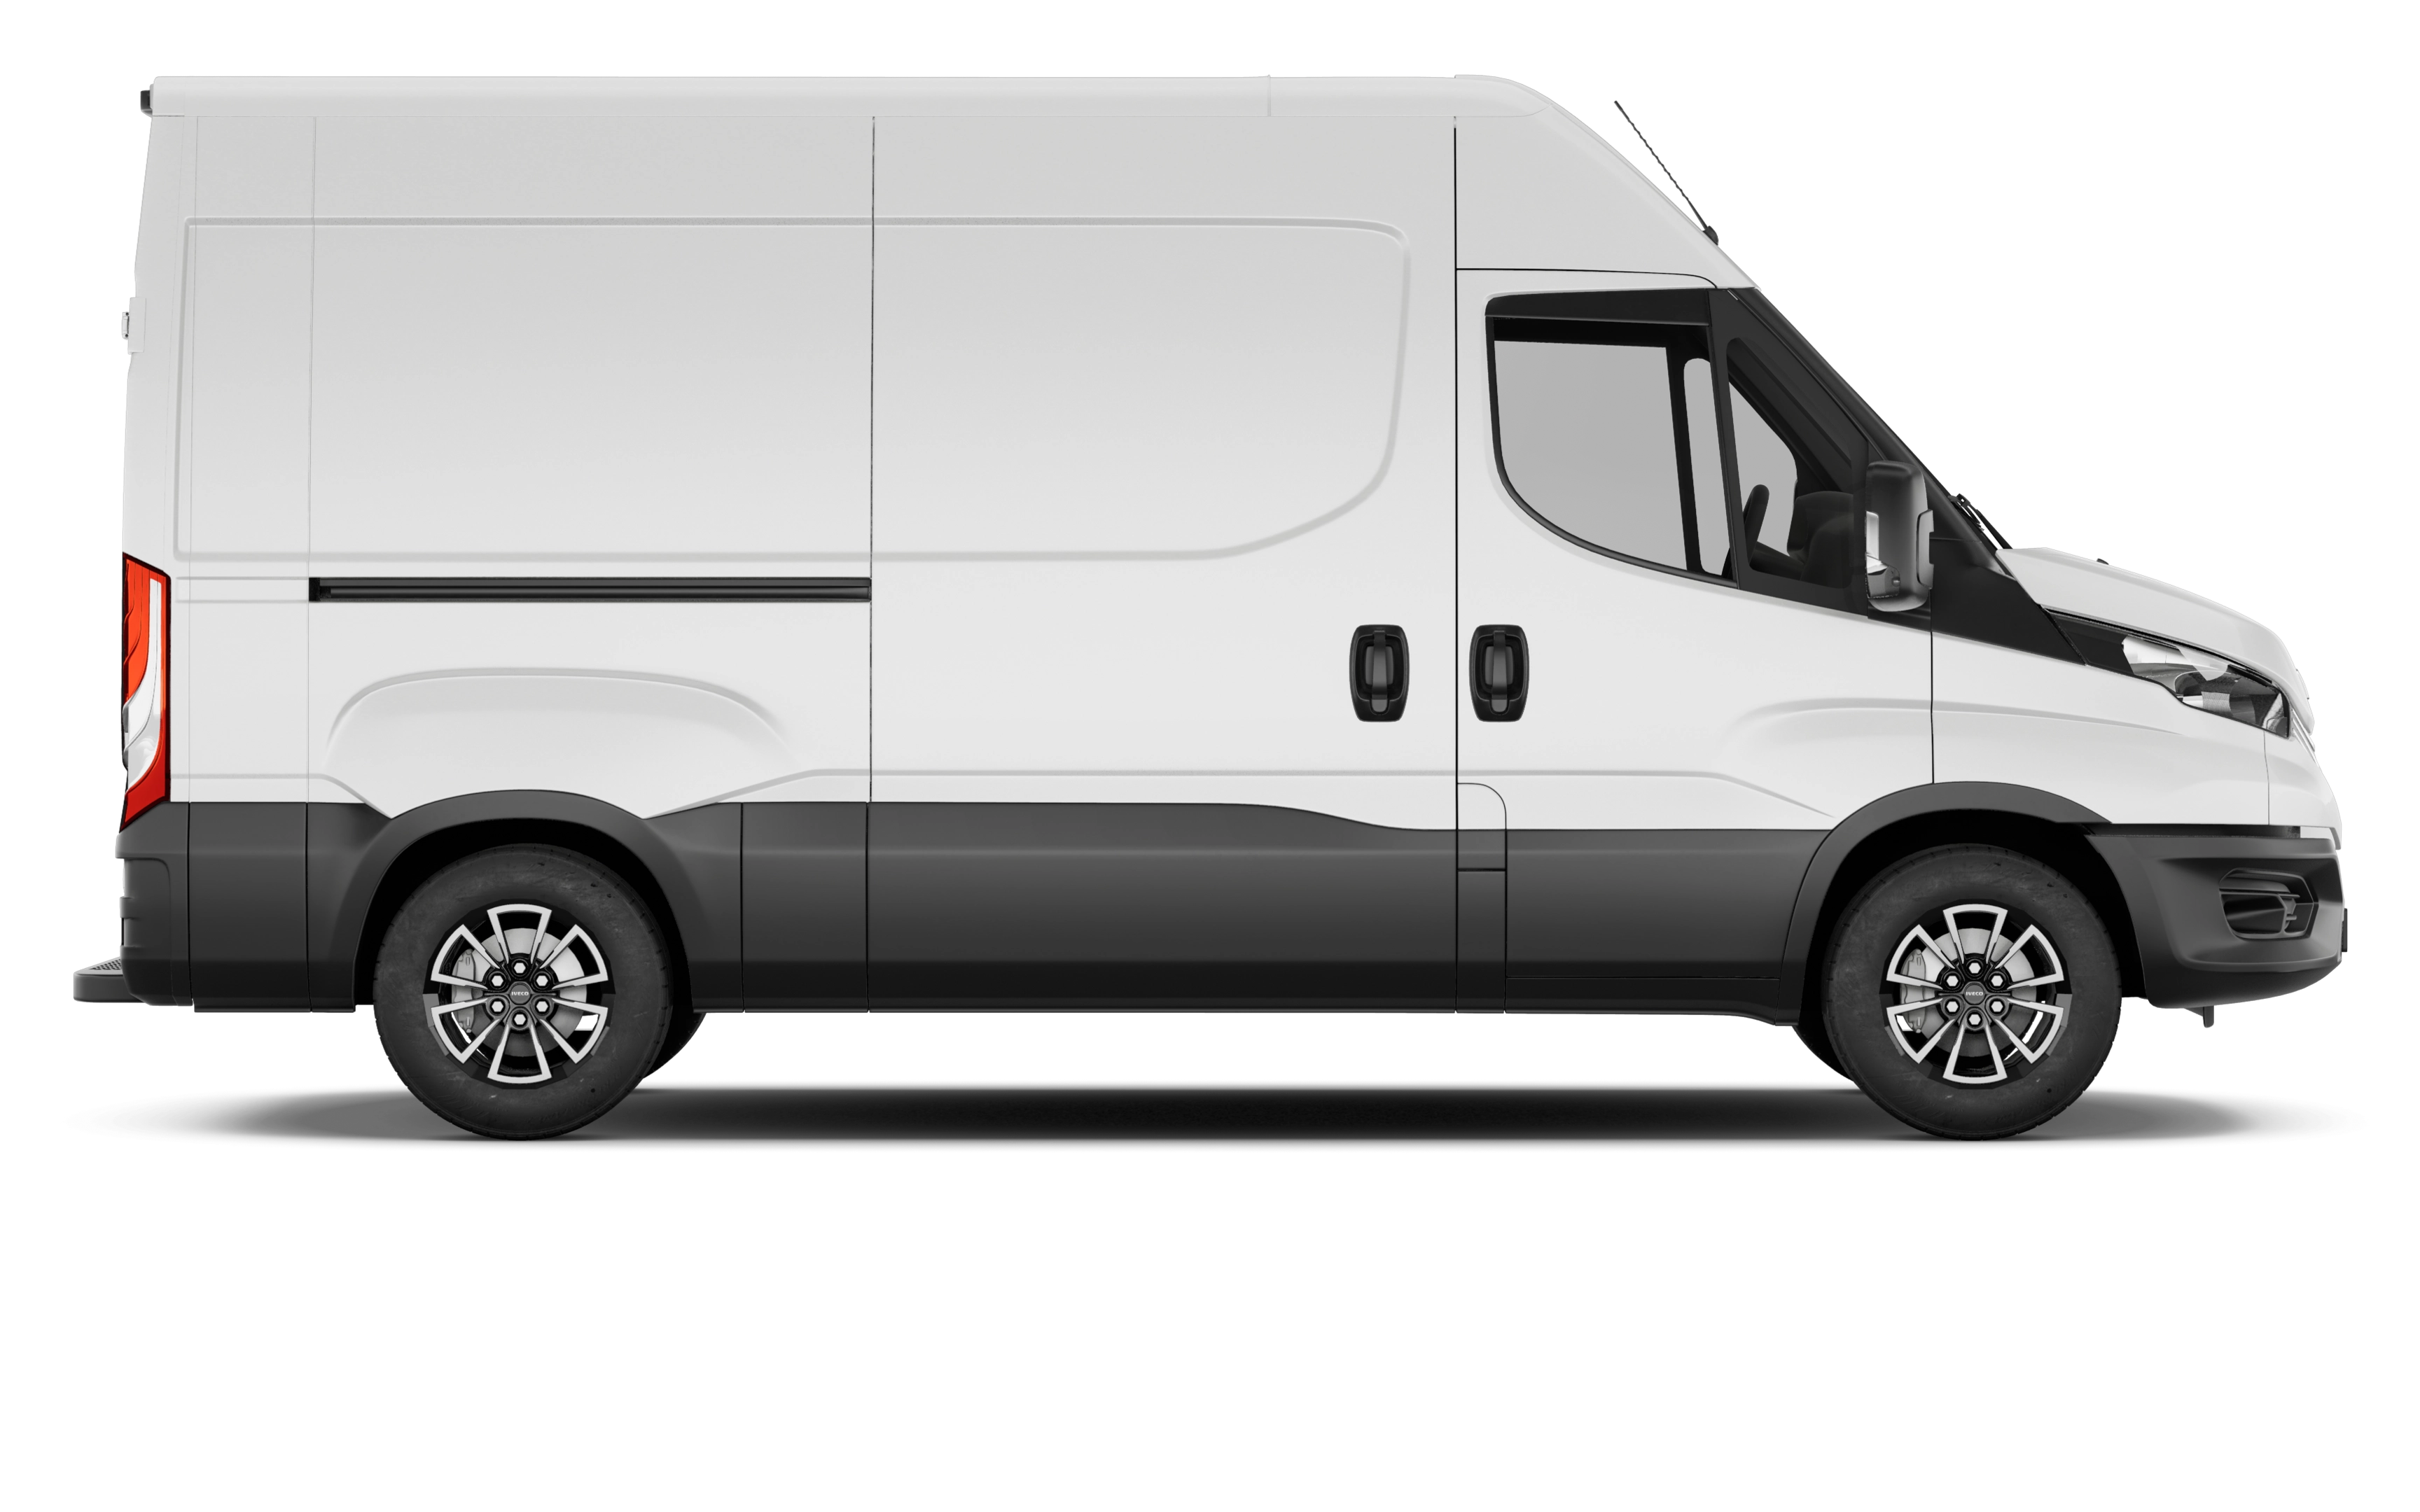 Iveco edaily 35s14 electric 140kw 74kwh high roof van 4100 wb auto [22kw]